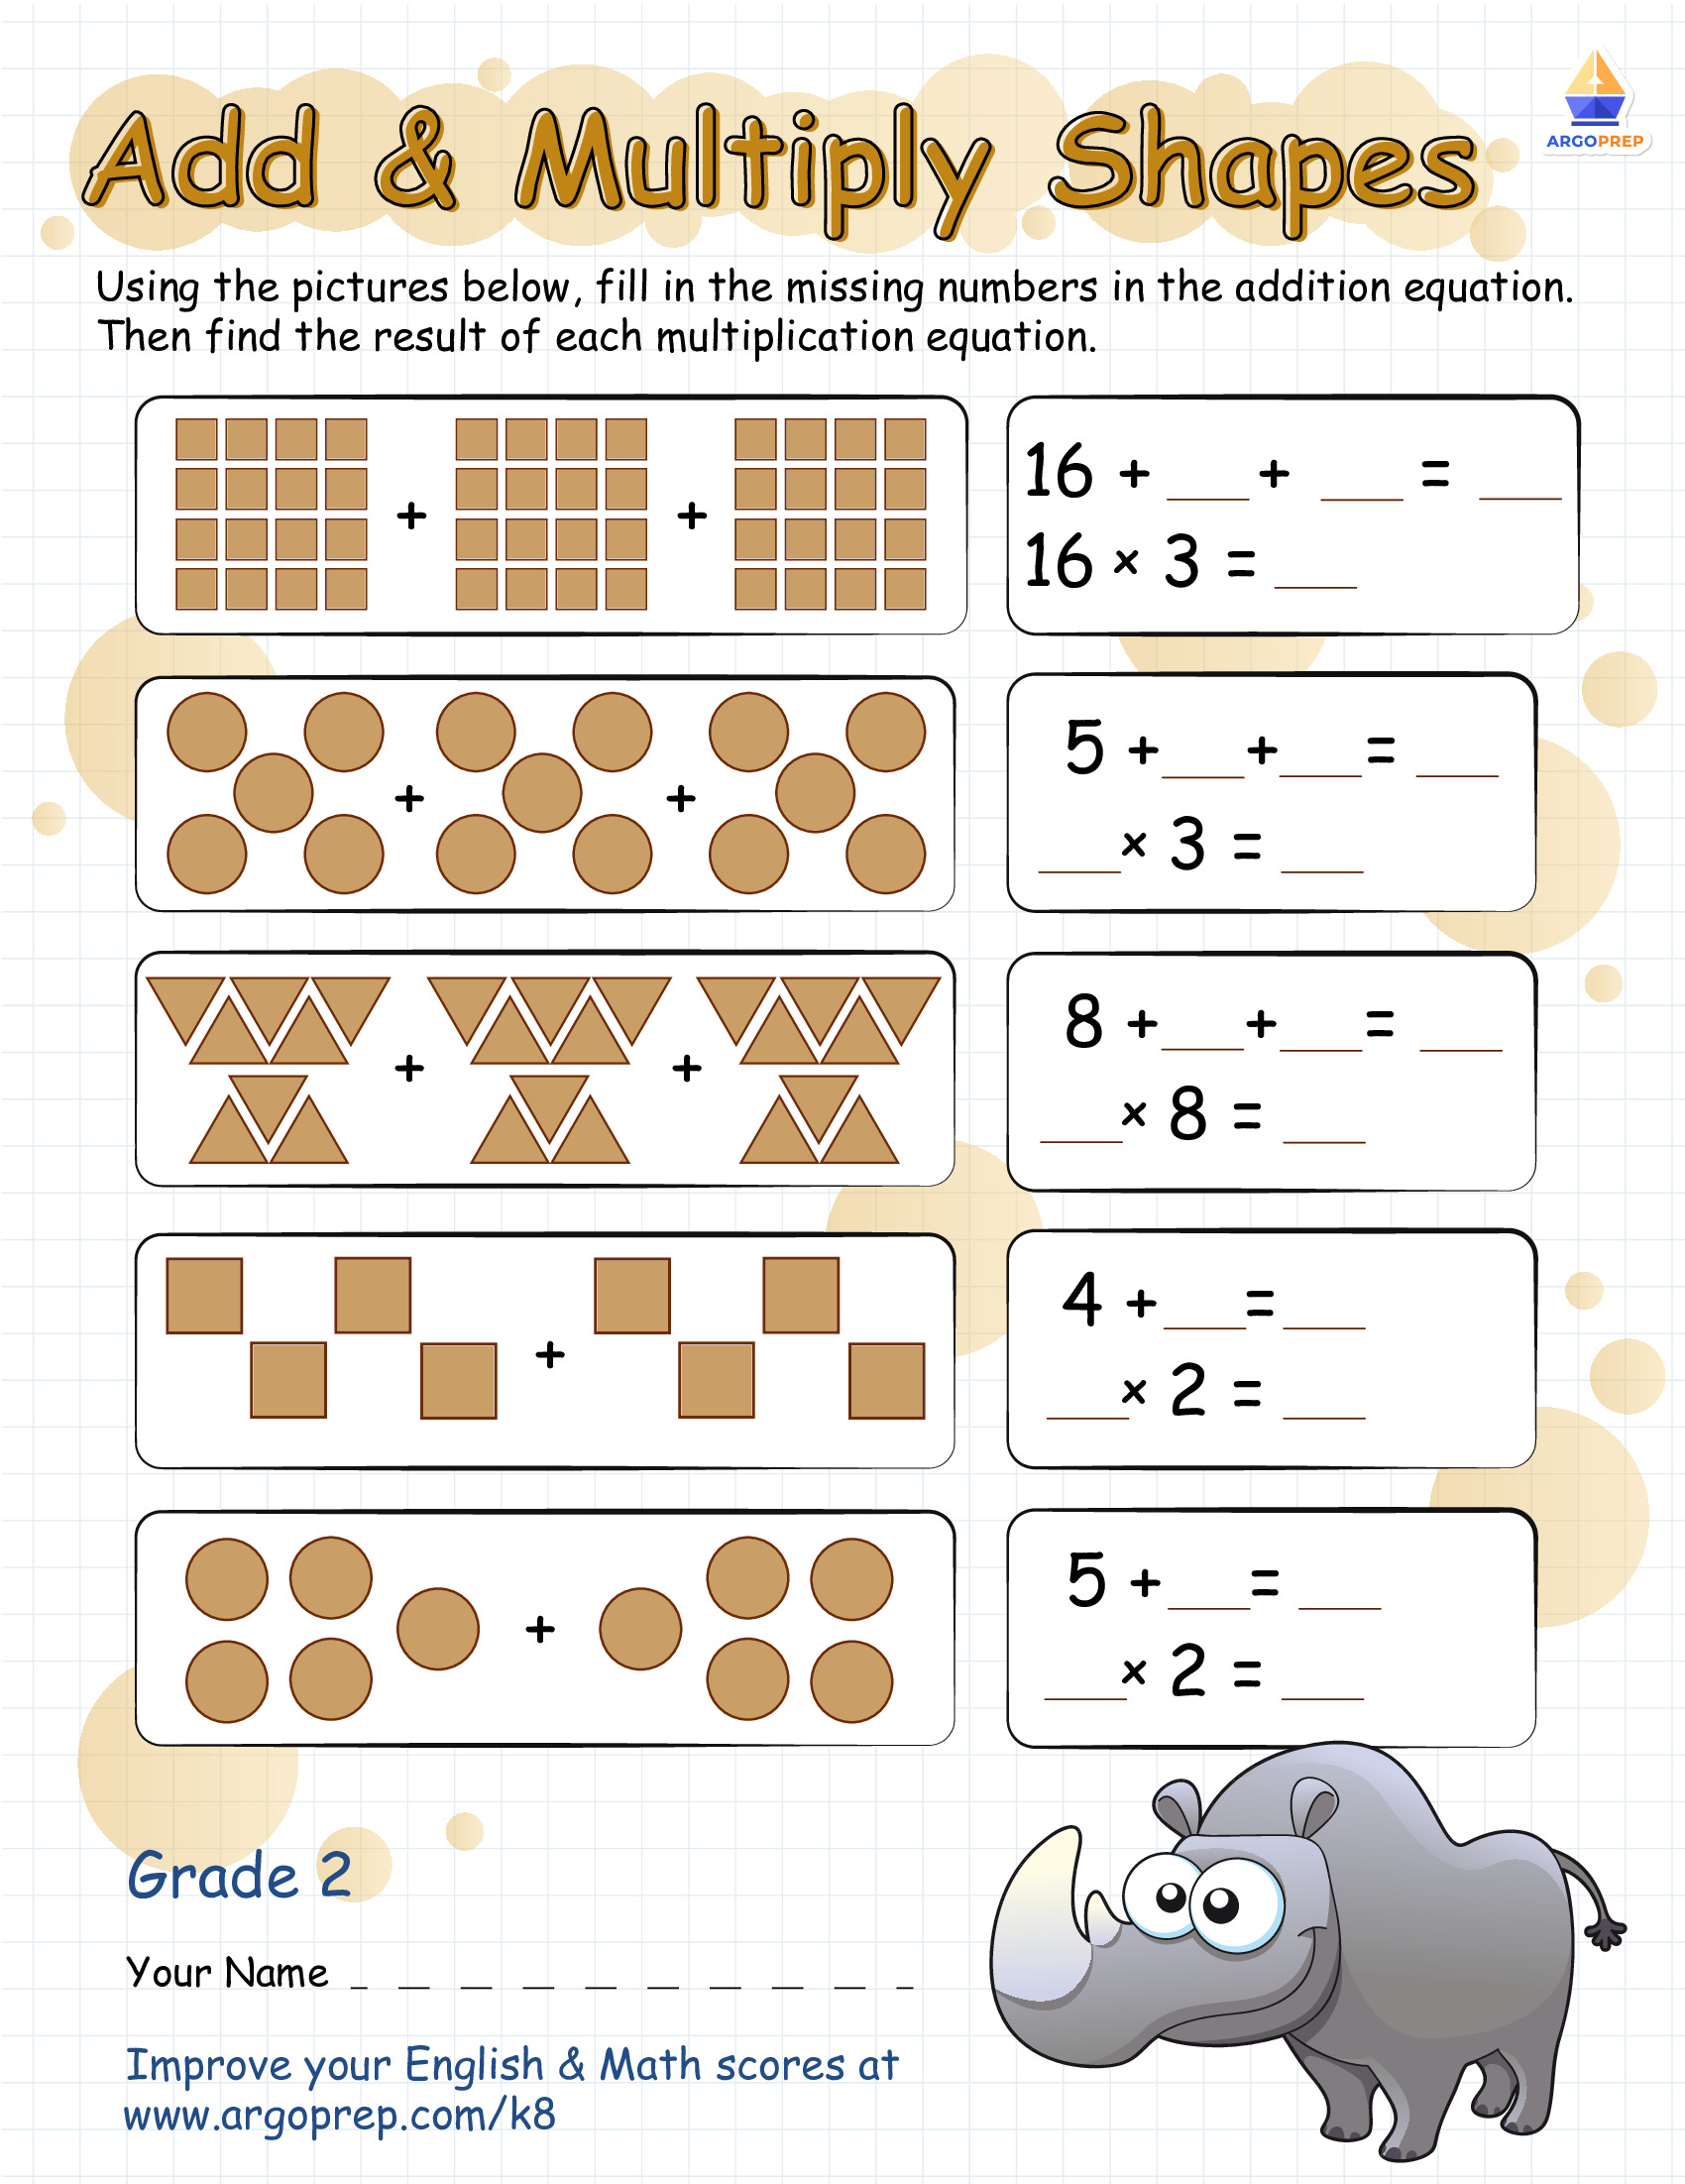 multiplication-worksheets-as-repeated-addition-printable-multiplication-flash-cards